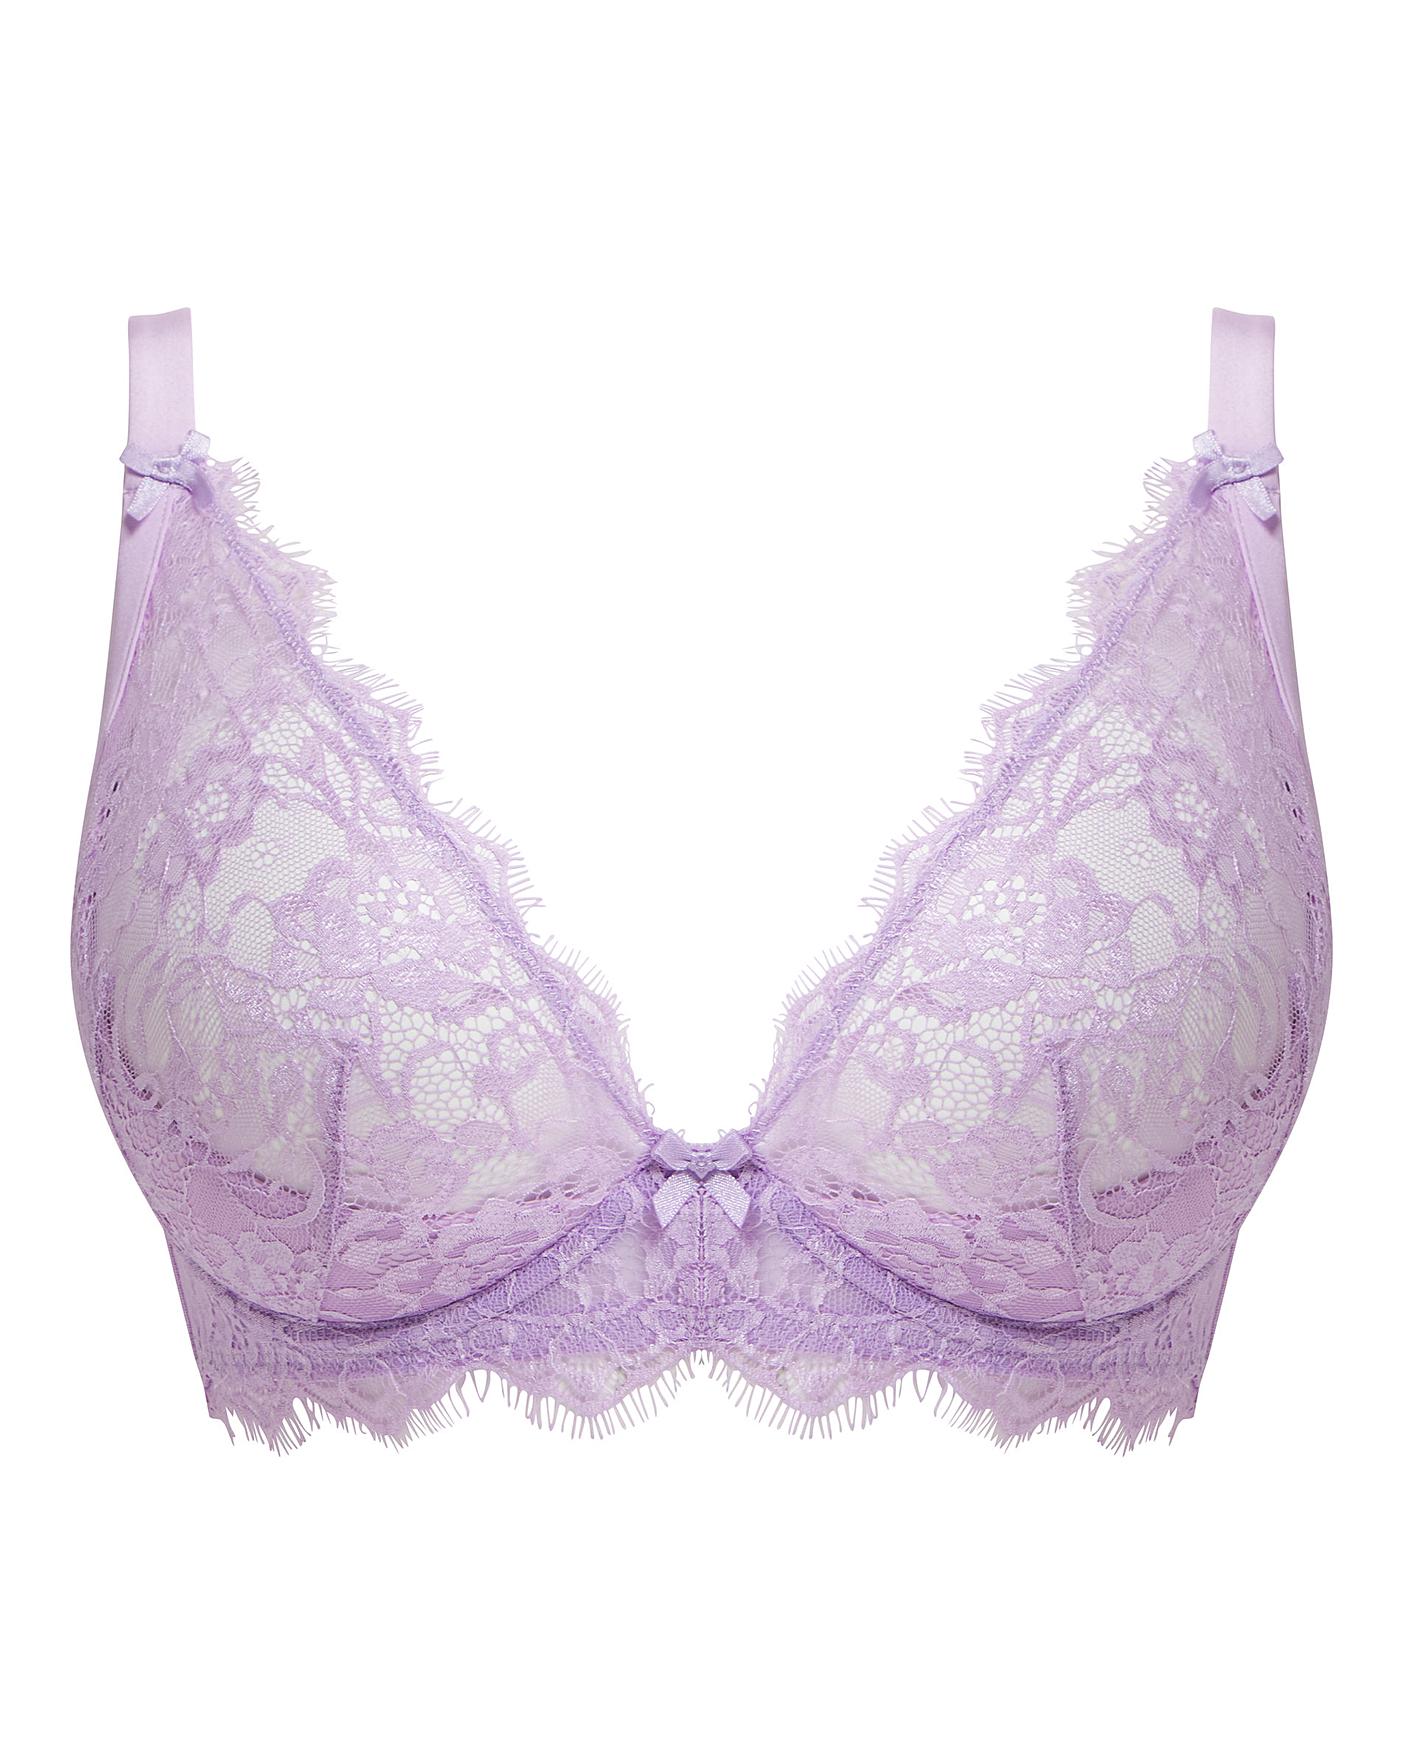 Figleaves Pulse Lace Underwired Plunge Bra B-G